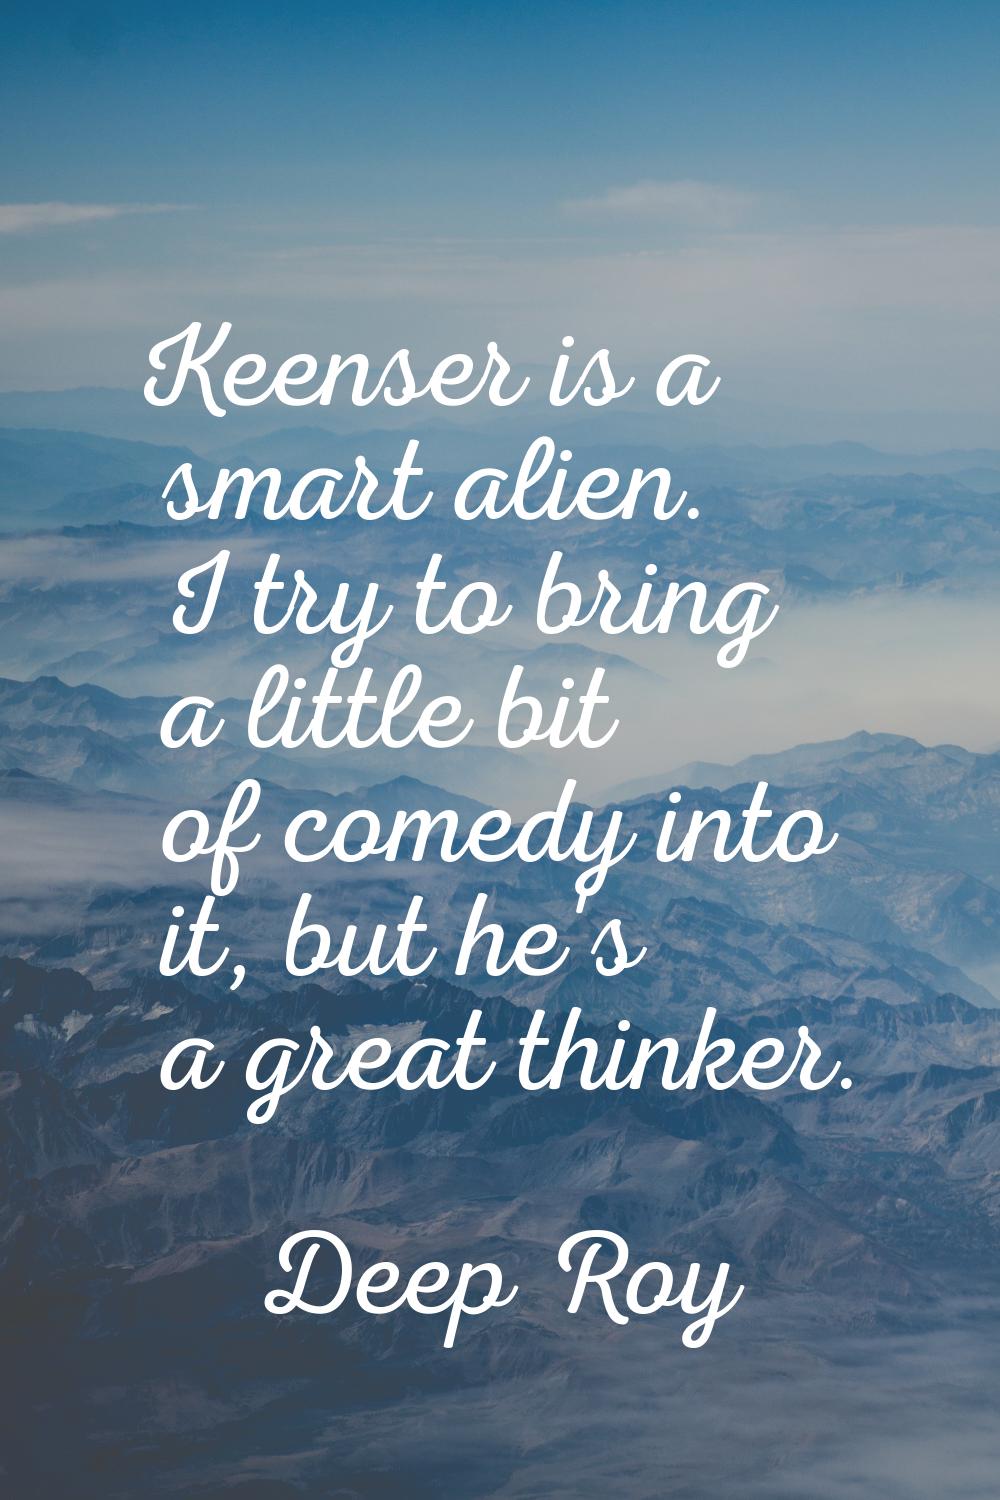 Keenser is a smart alien. I try to bring a little bit of comedy into it, but he's a great thinker.